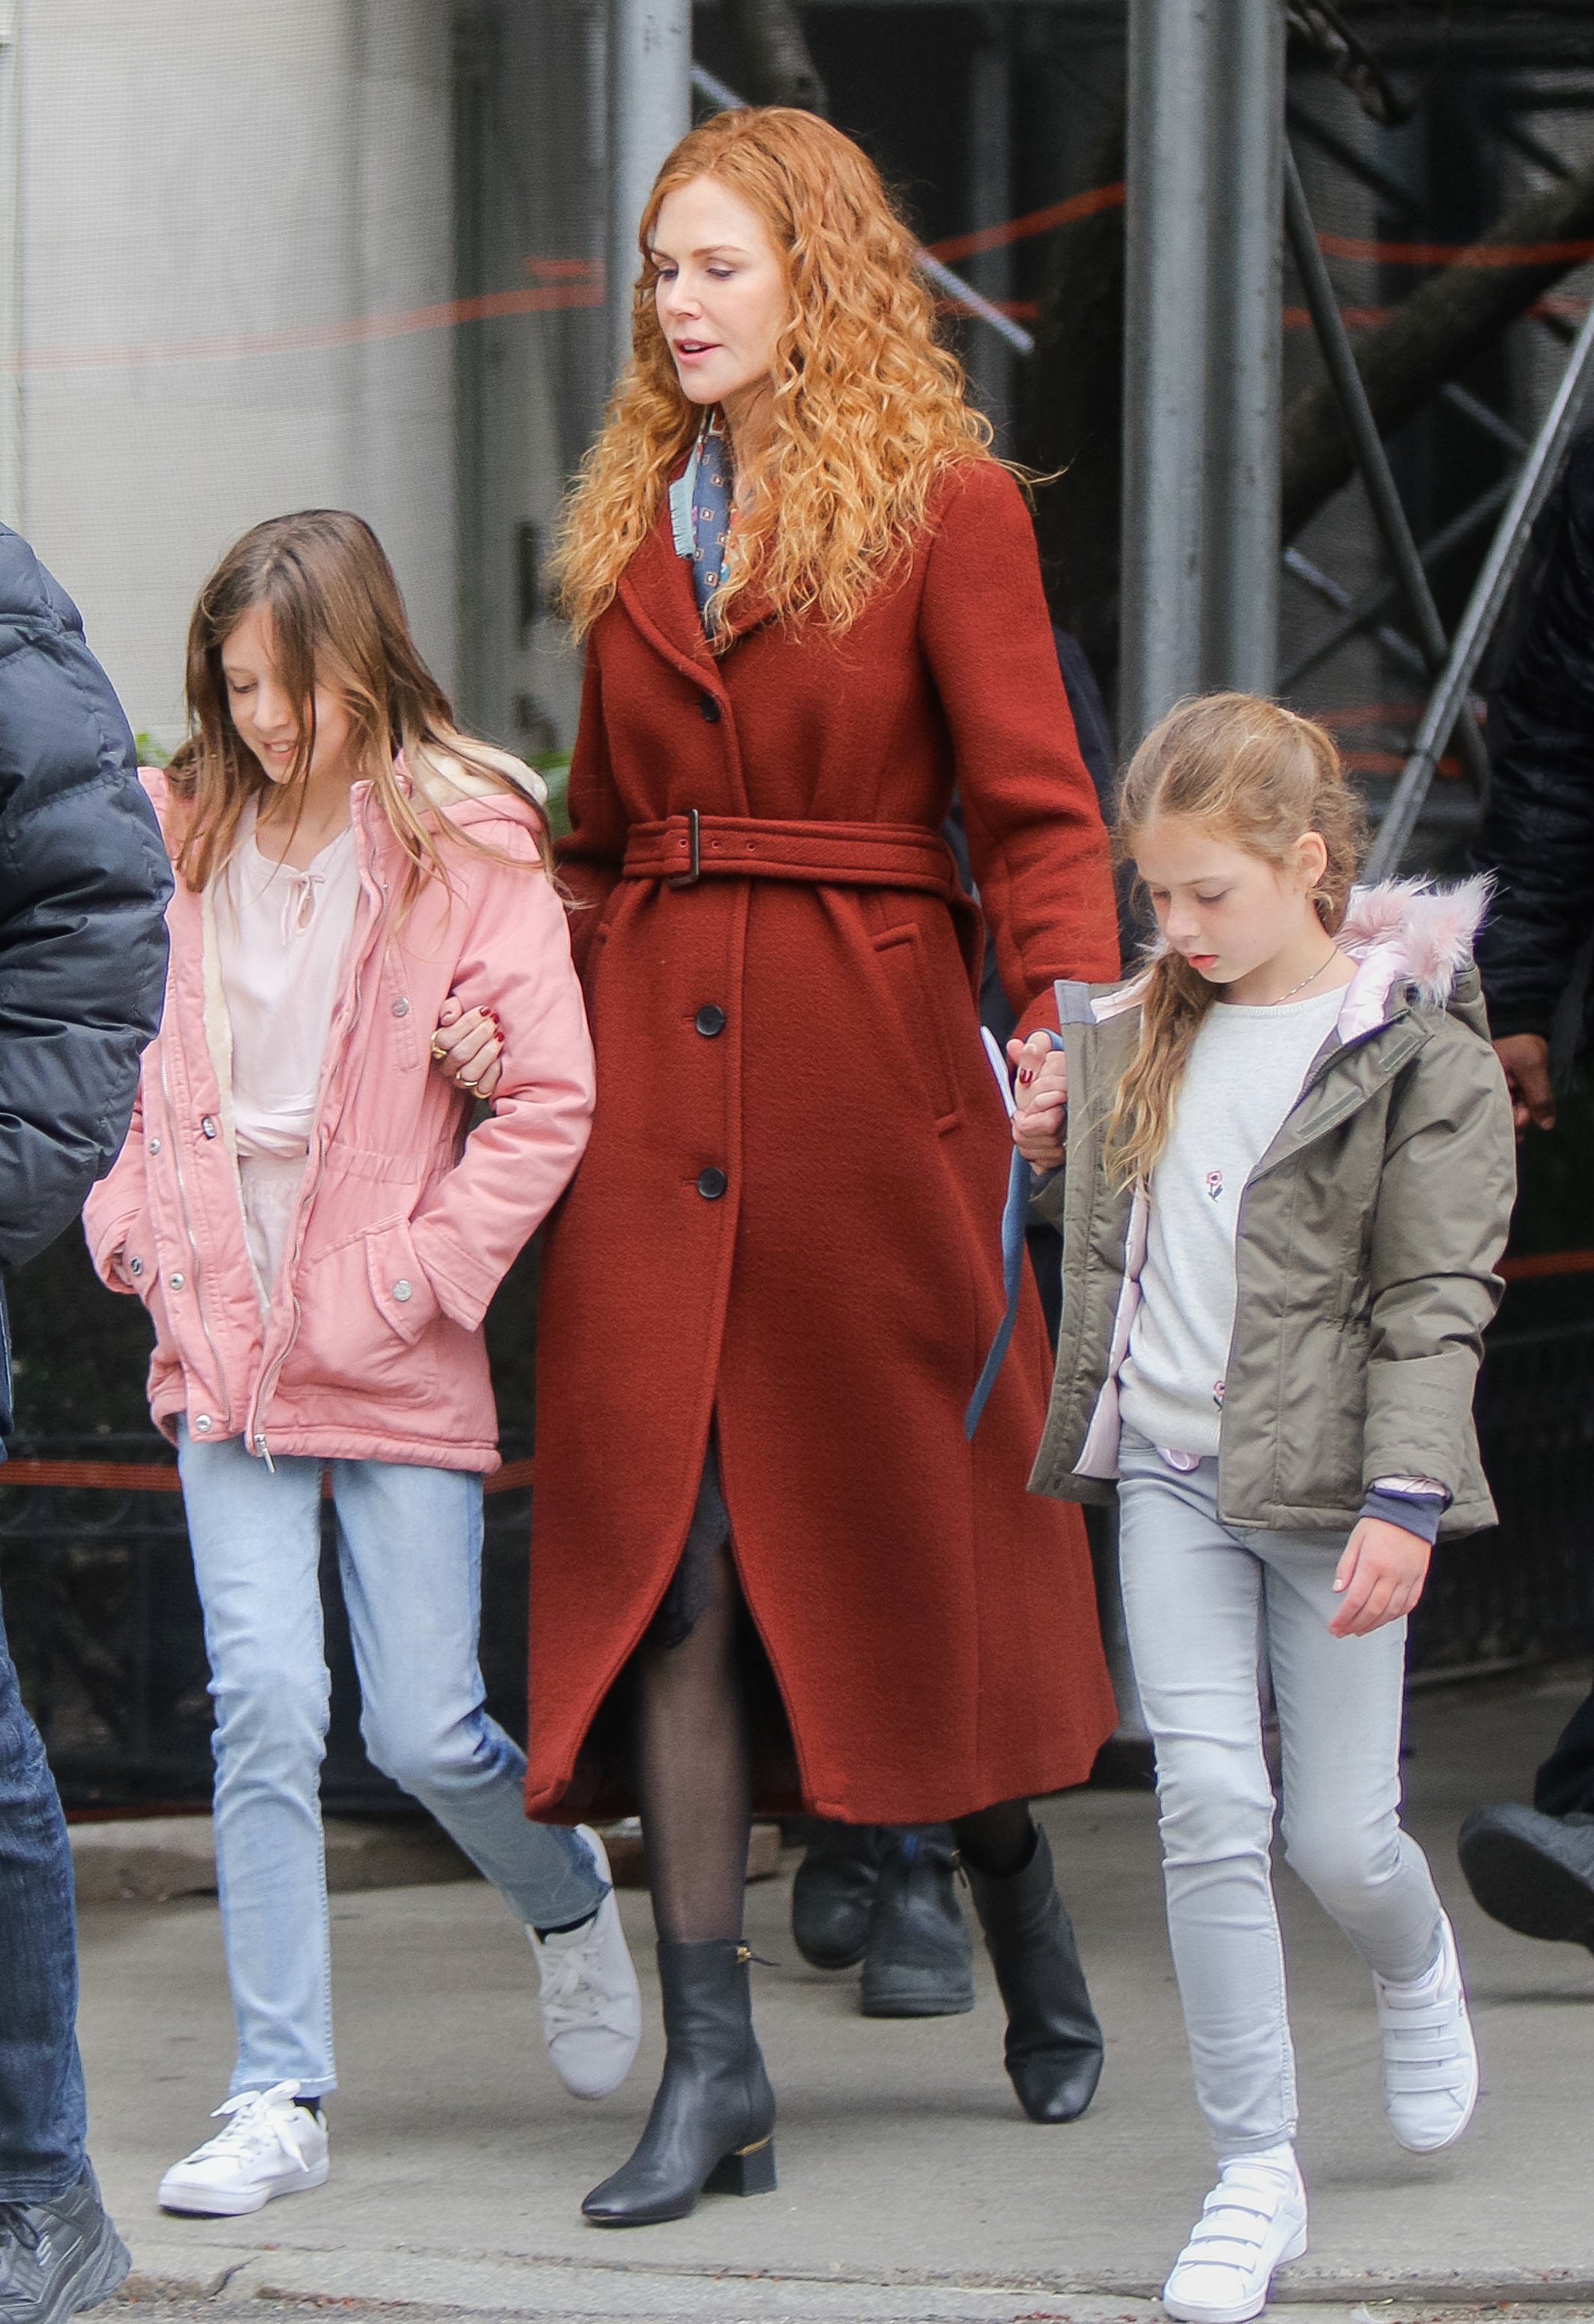  Nicole Kidman and her daughter, Faith Margaret are seen on March 29, 2019 in New York City | Source: Getty Images